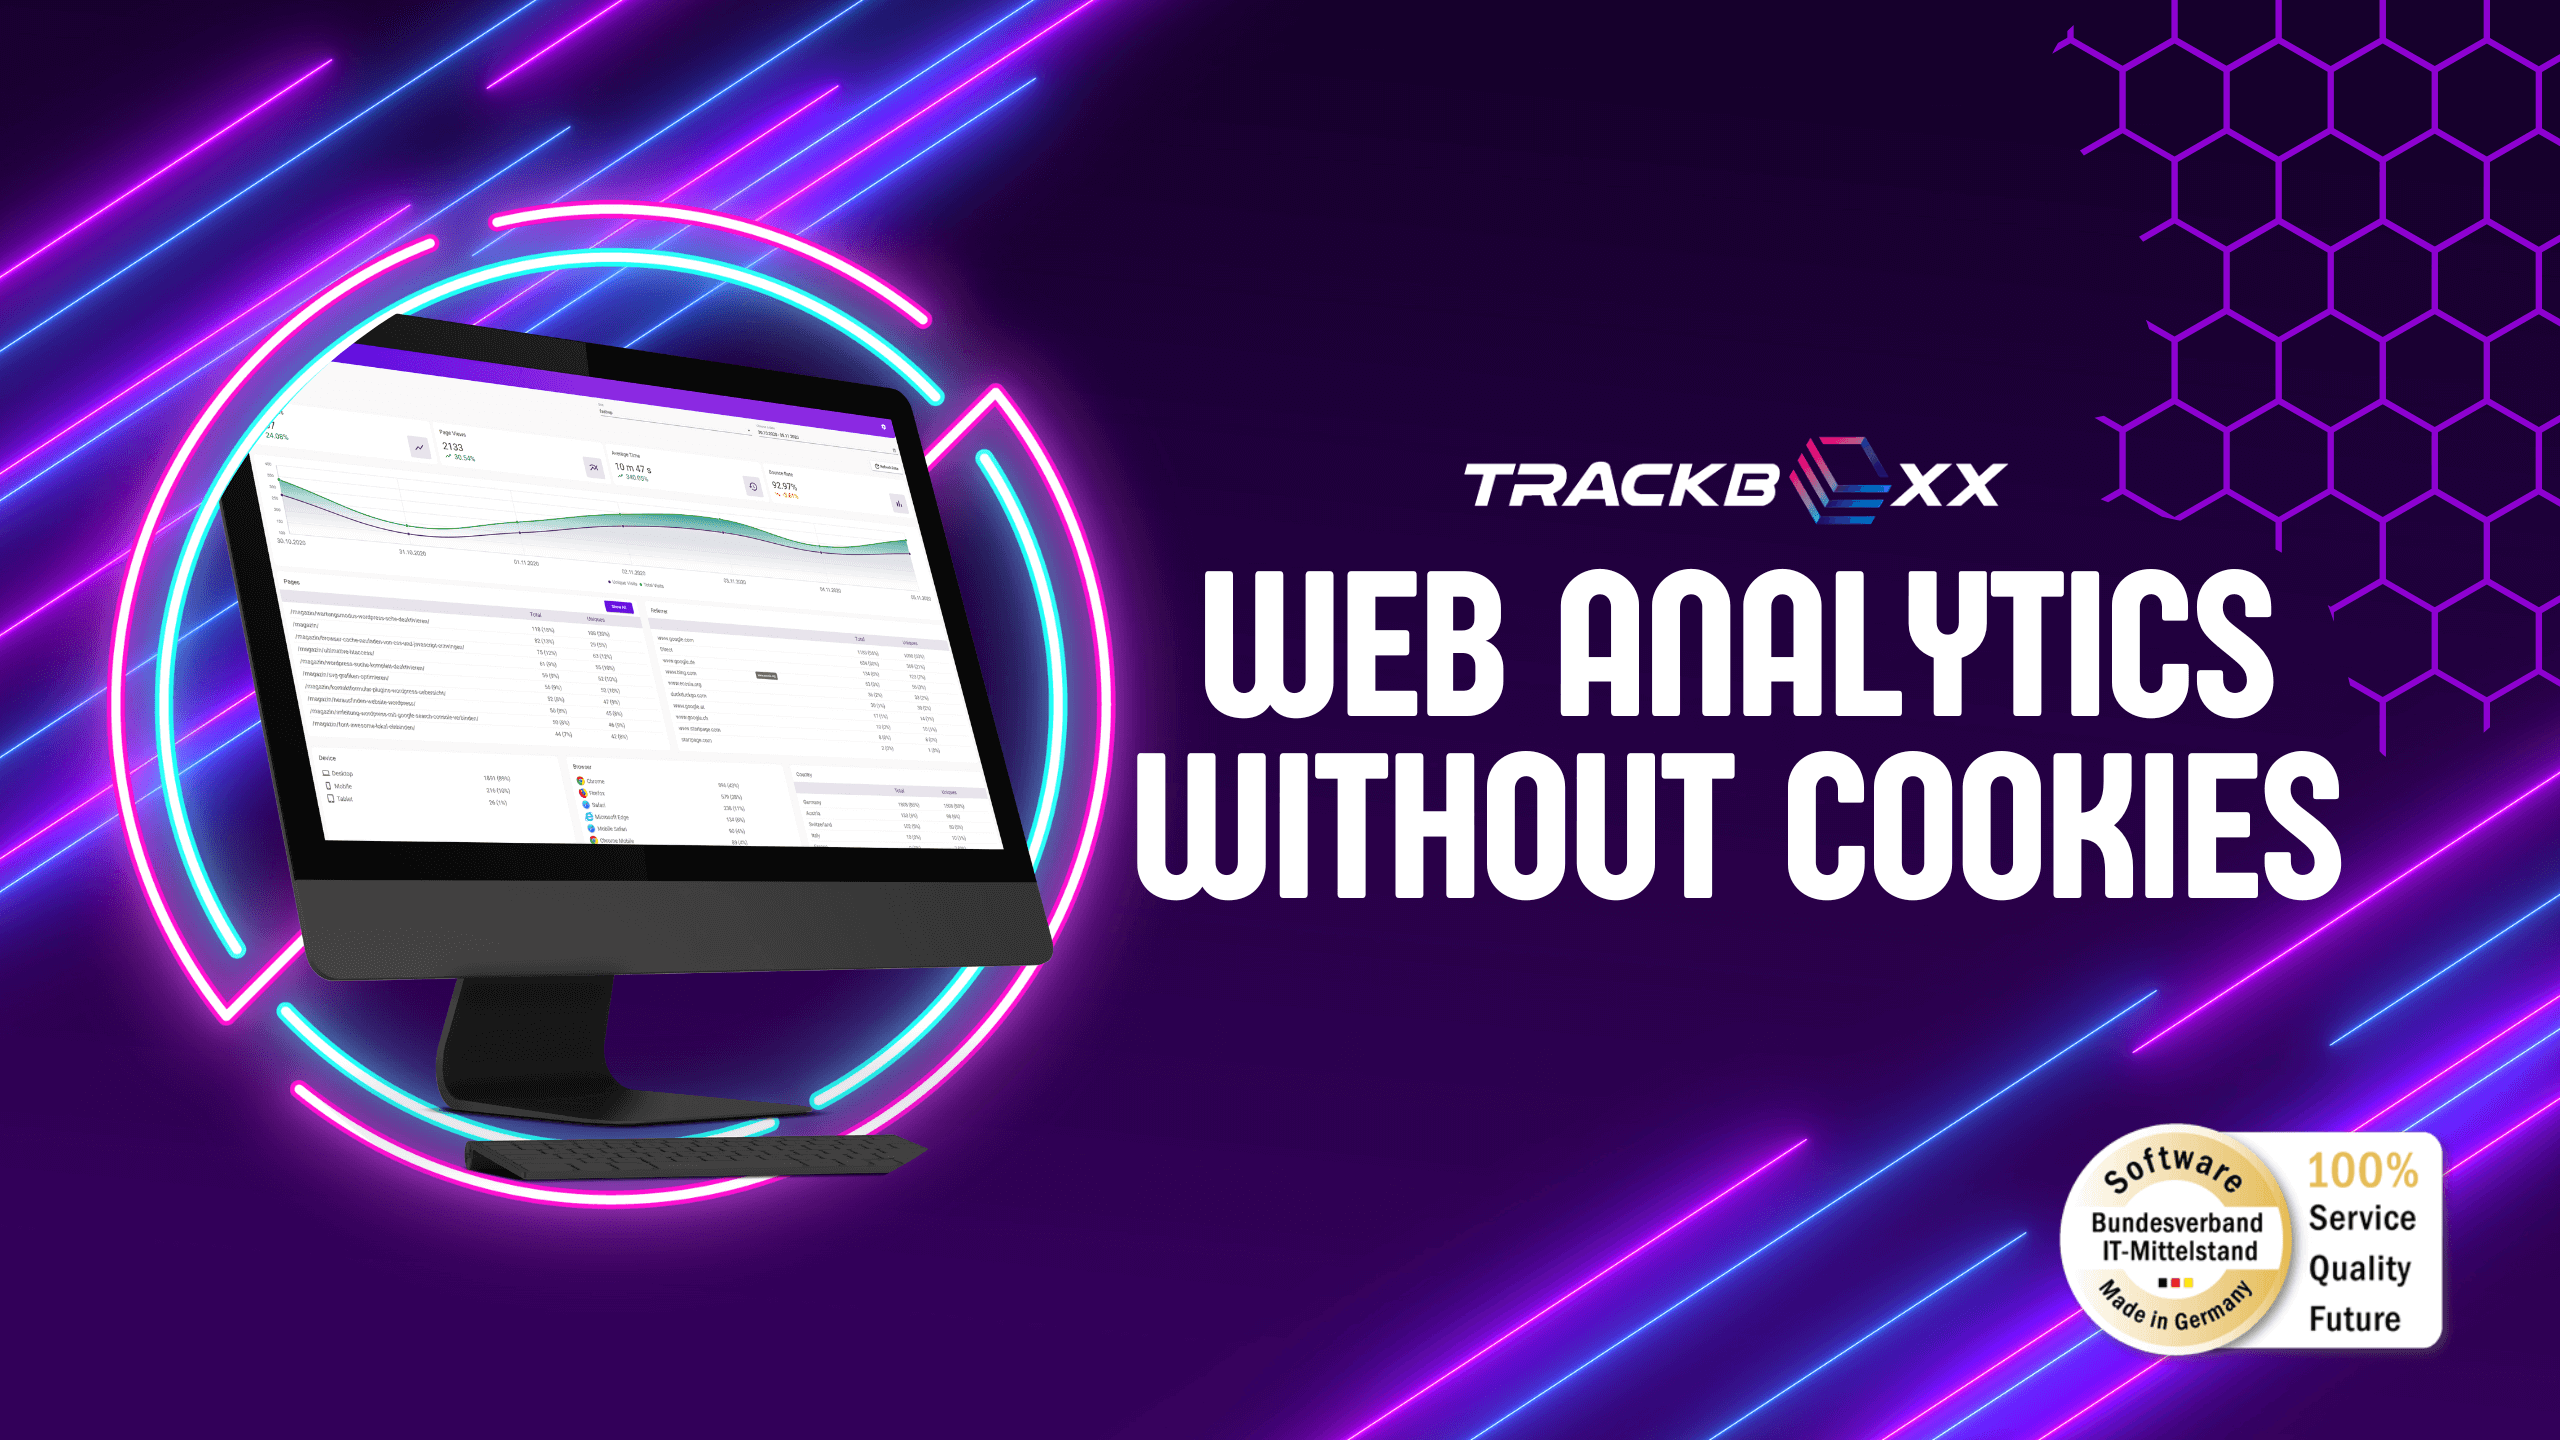 Review Trackboxx: GDPR-compliant web analytics without cookies! - Appvizer